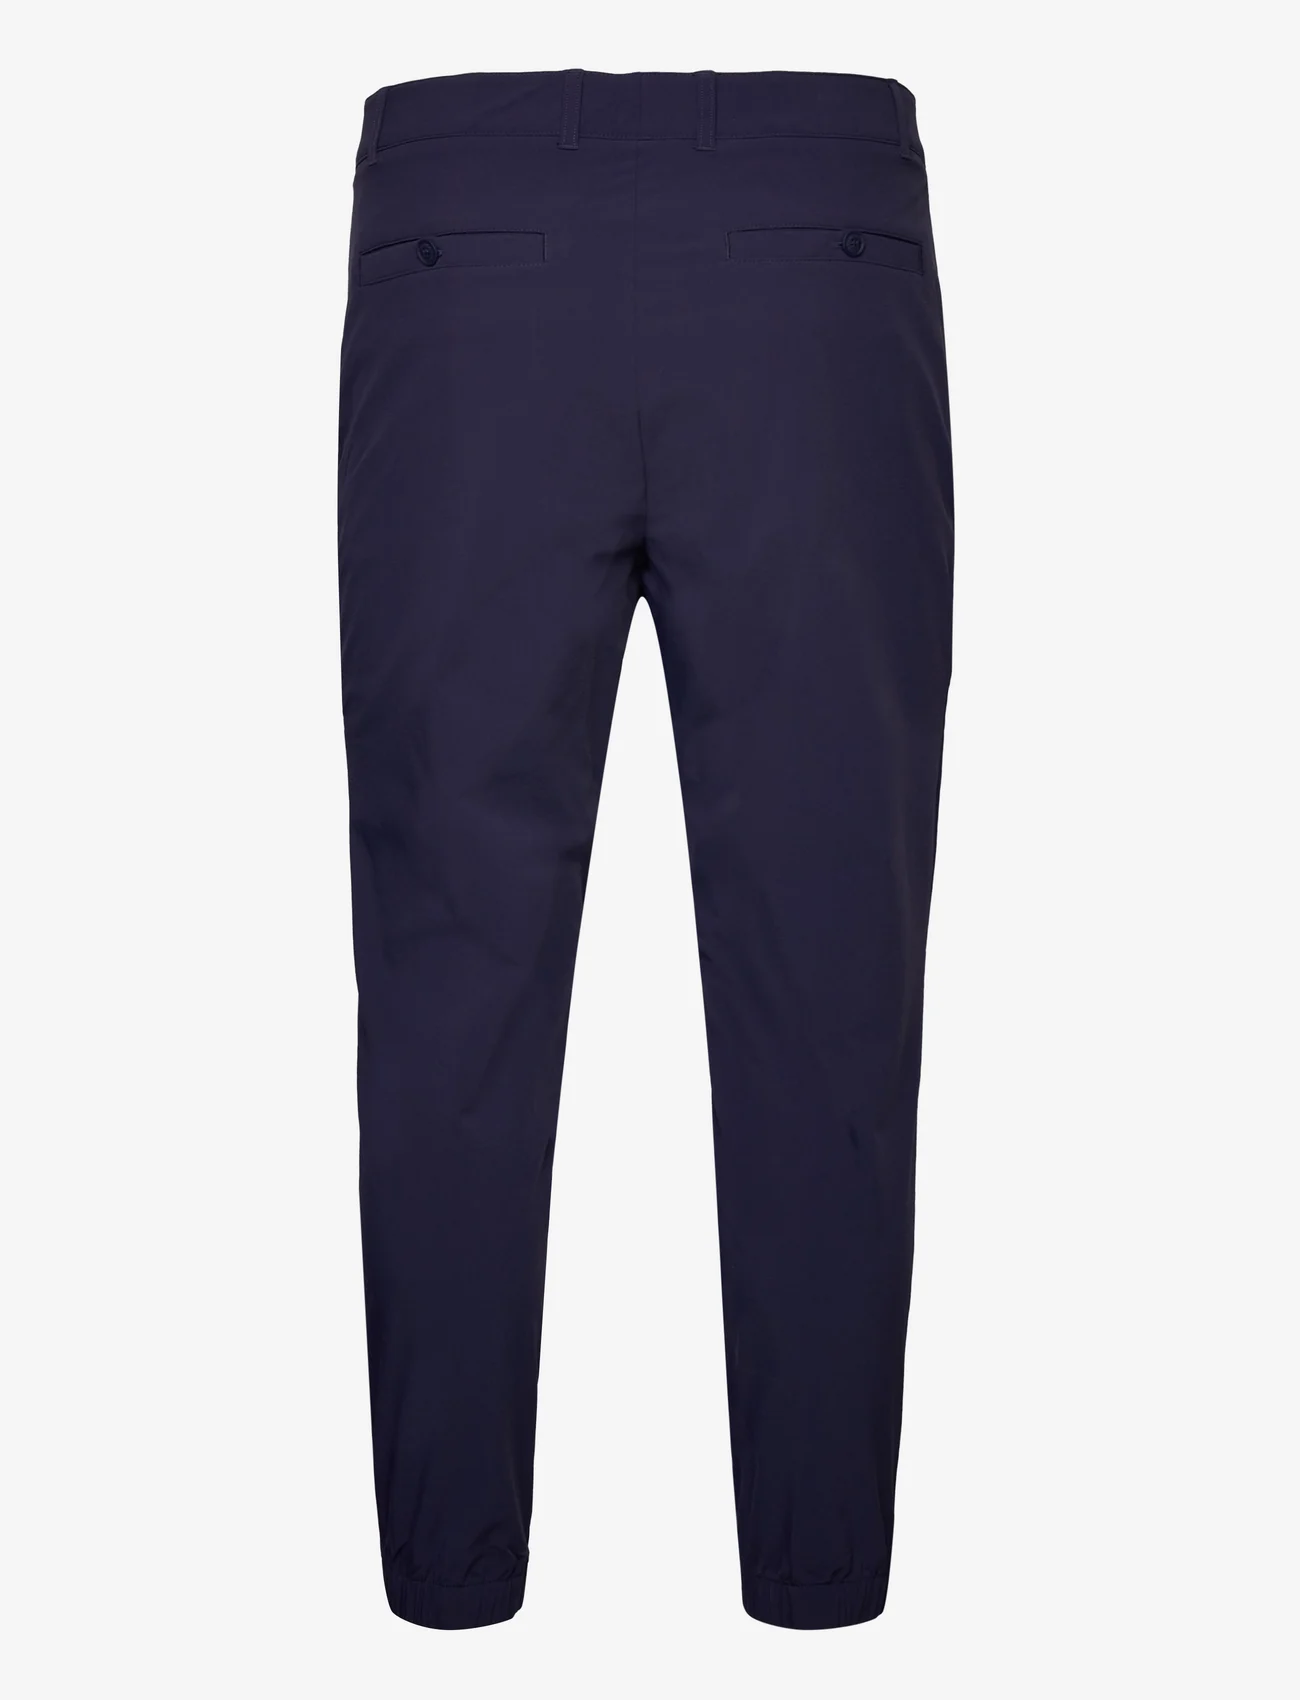 Lacoste - TROUSERS - golfhosen - navy blue - 1